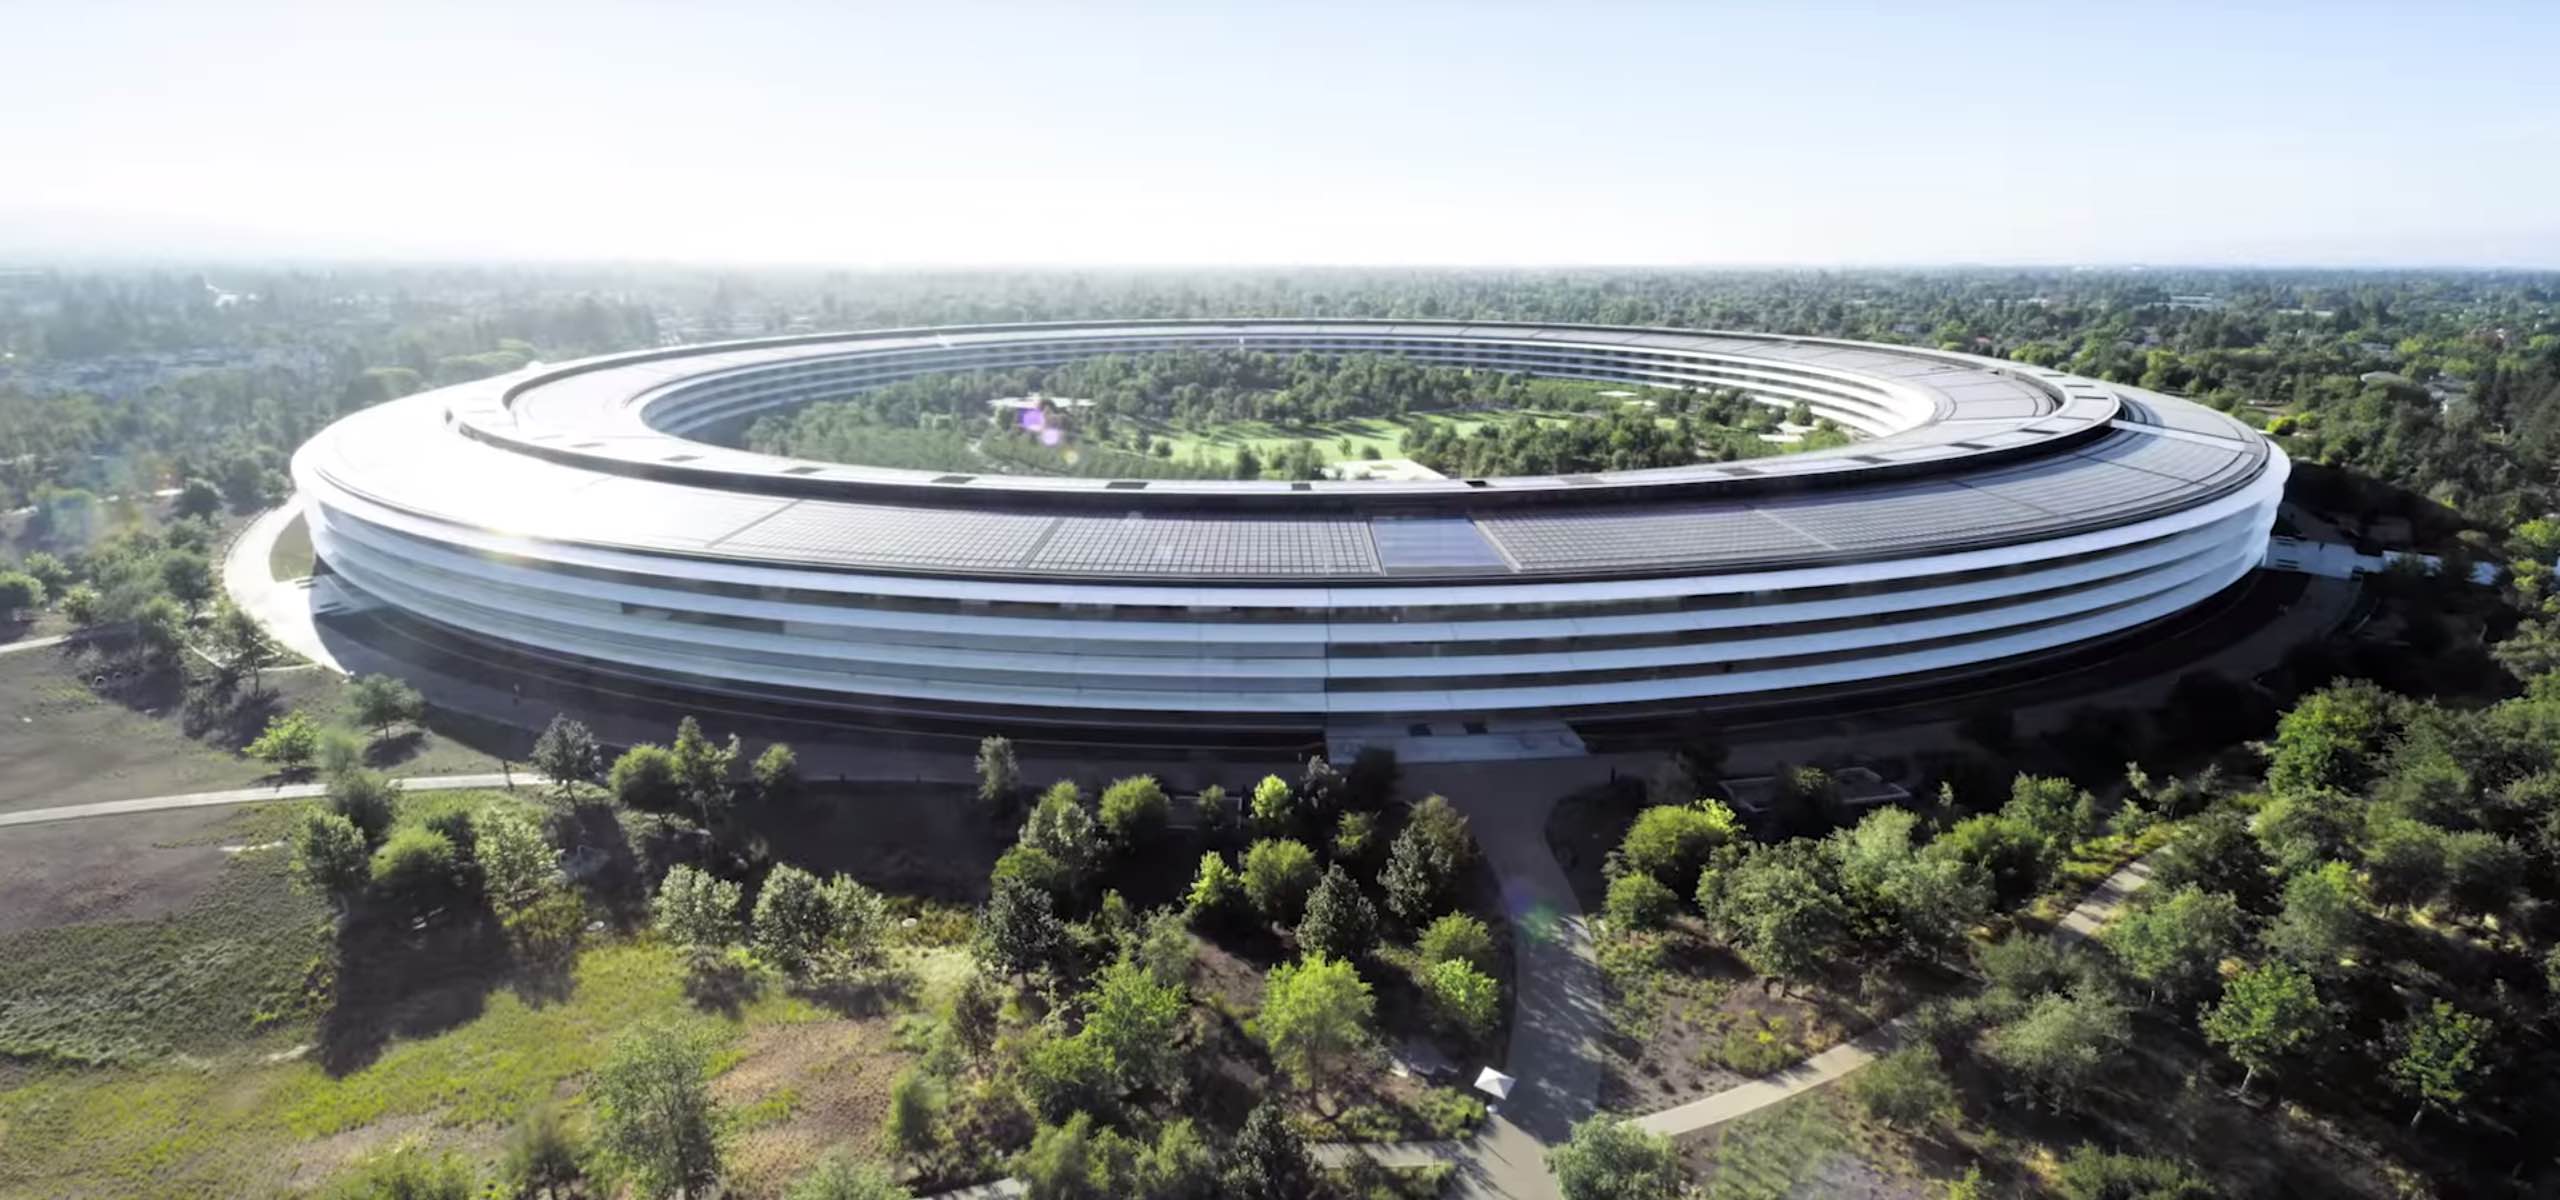 A photograph showing an aerial view oof the Apple Park headquarters